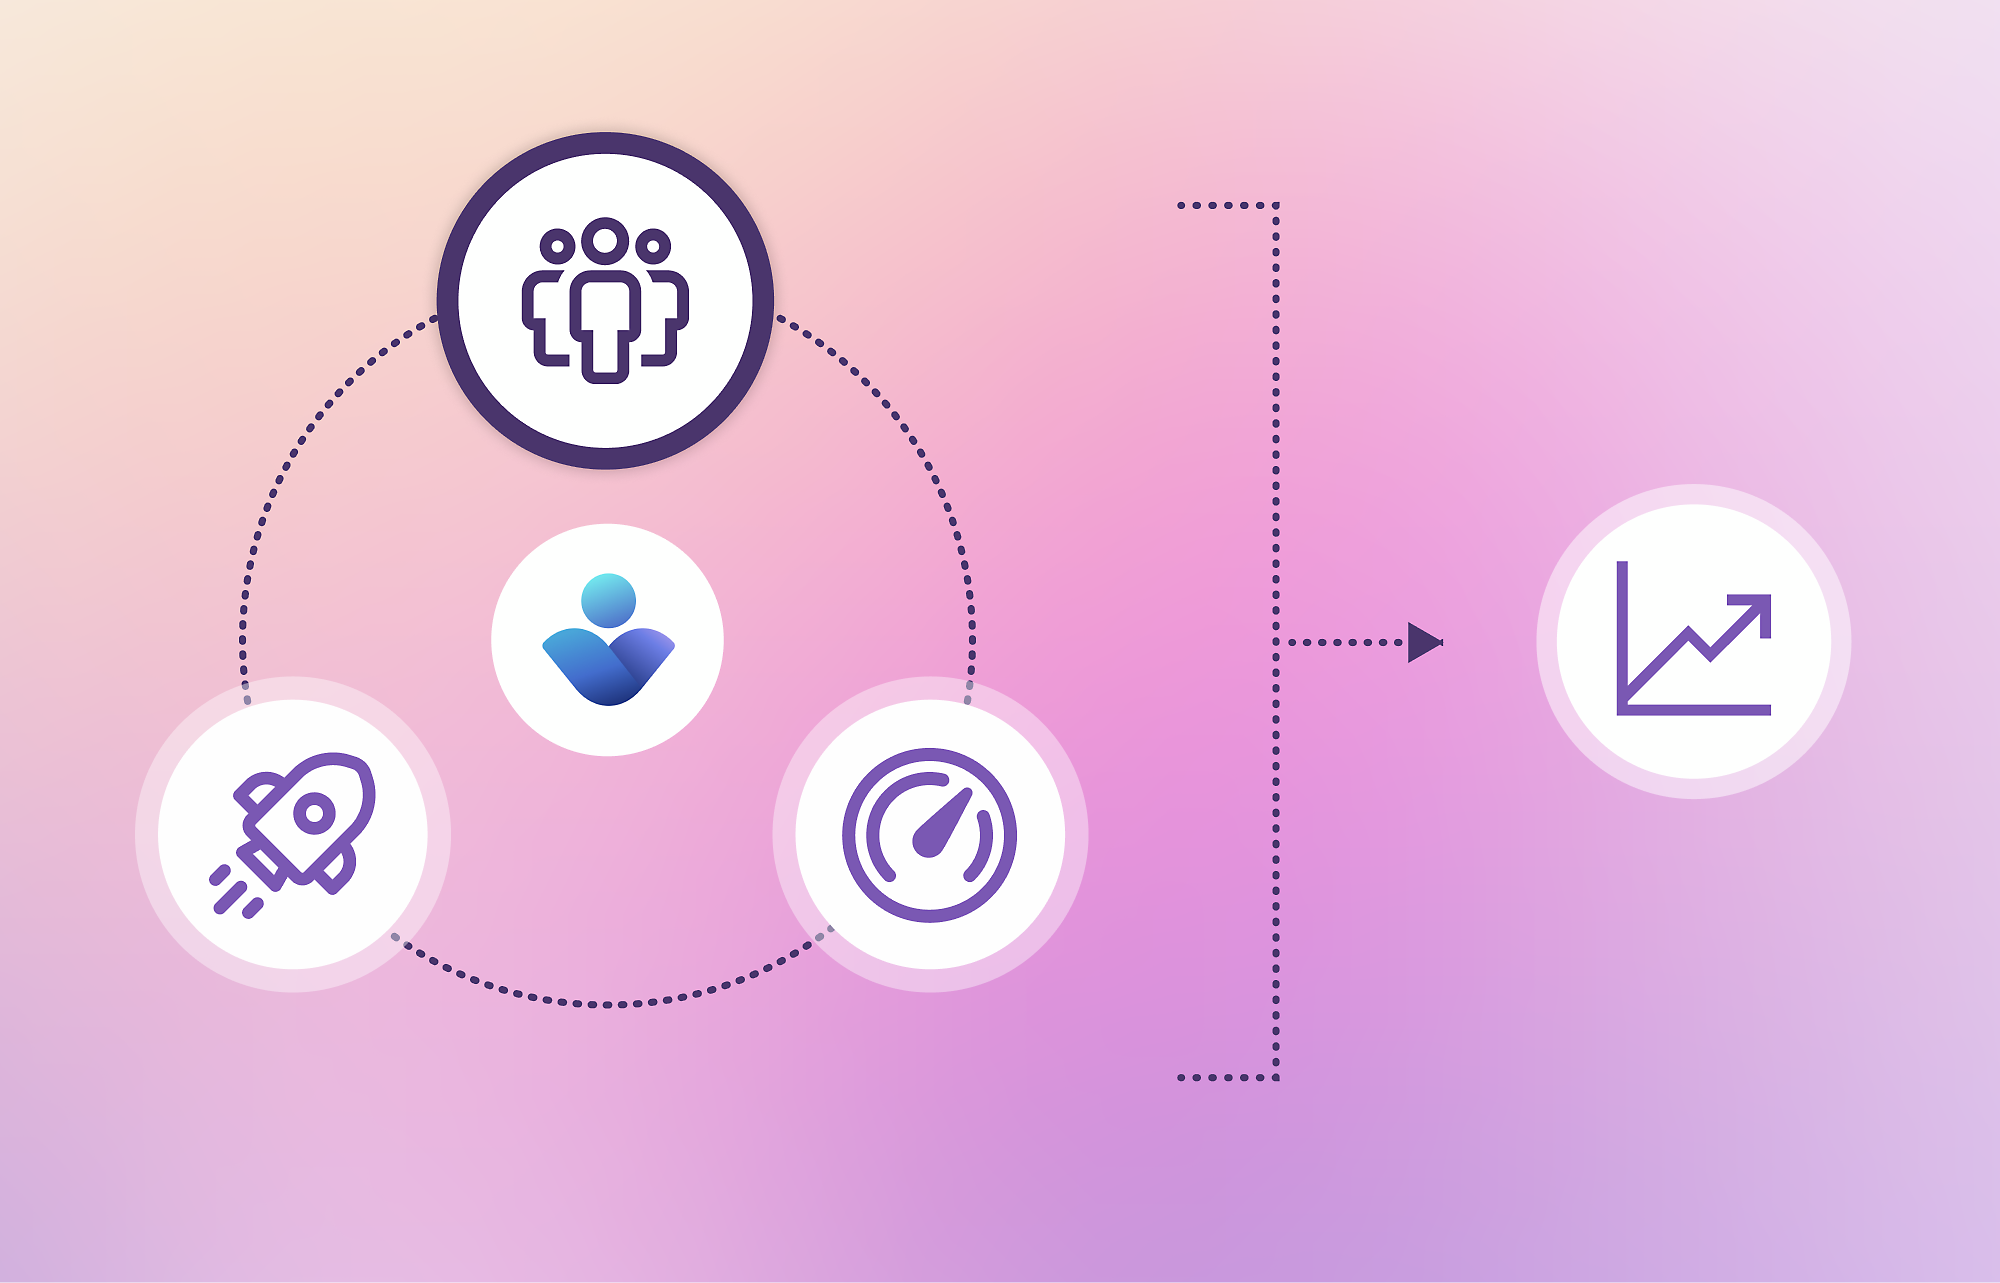 Graphic illustrating a workflow with icons representing teamwork, user engagement, and performance tracking.